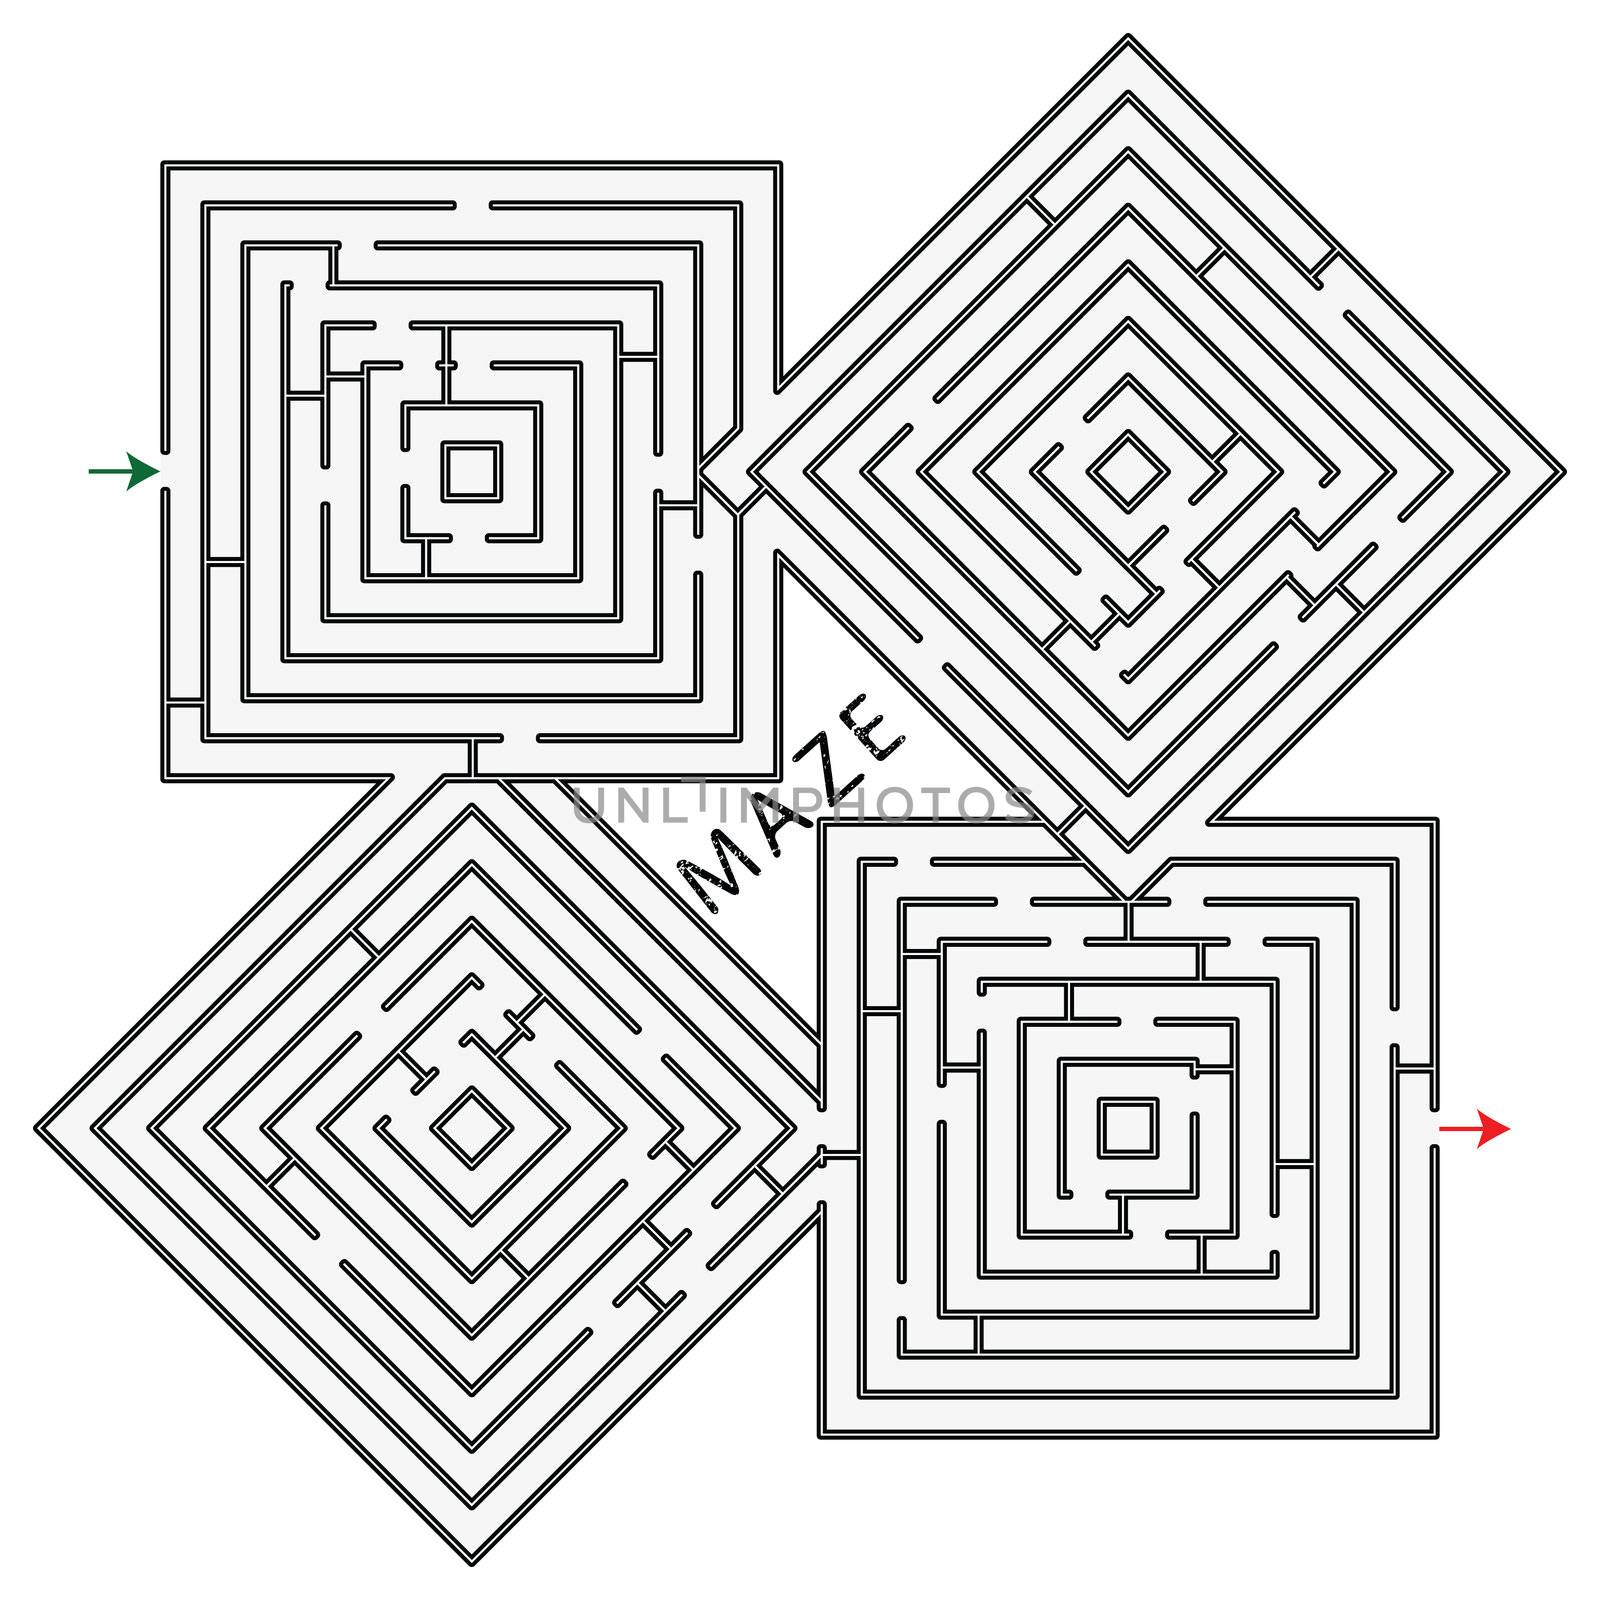 squares maze against white background, abstract vector art illustration